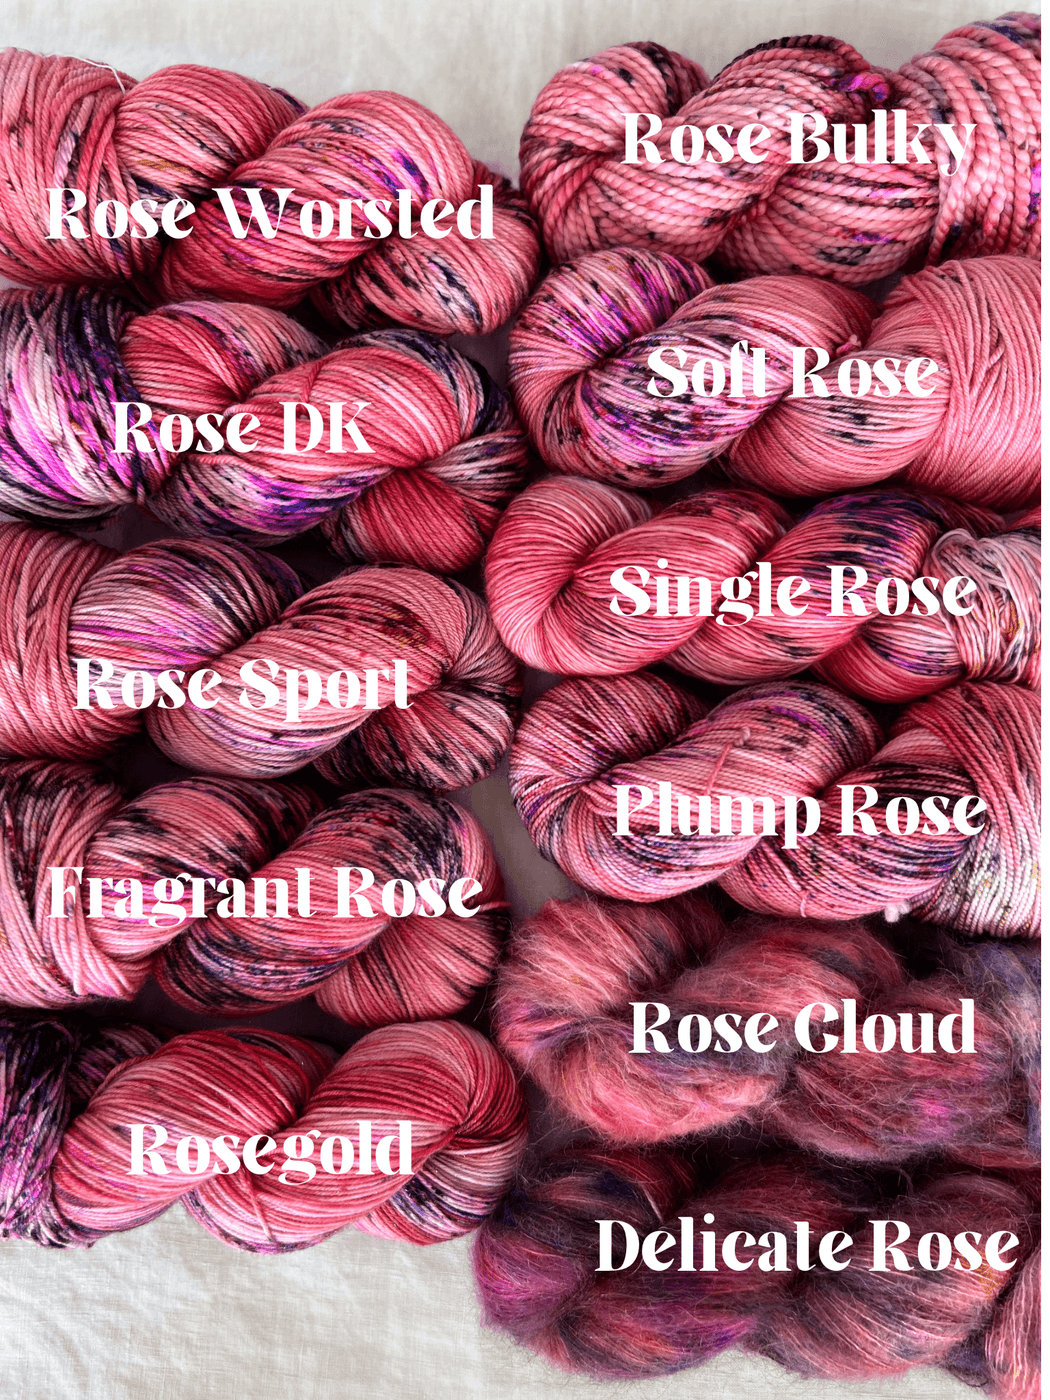 Pombaline - Ruby and Roses Yarn - Hand Dyed Yarn